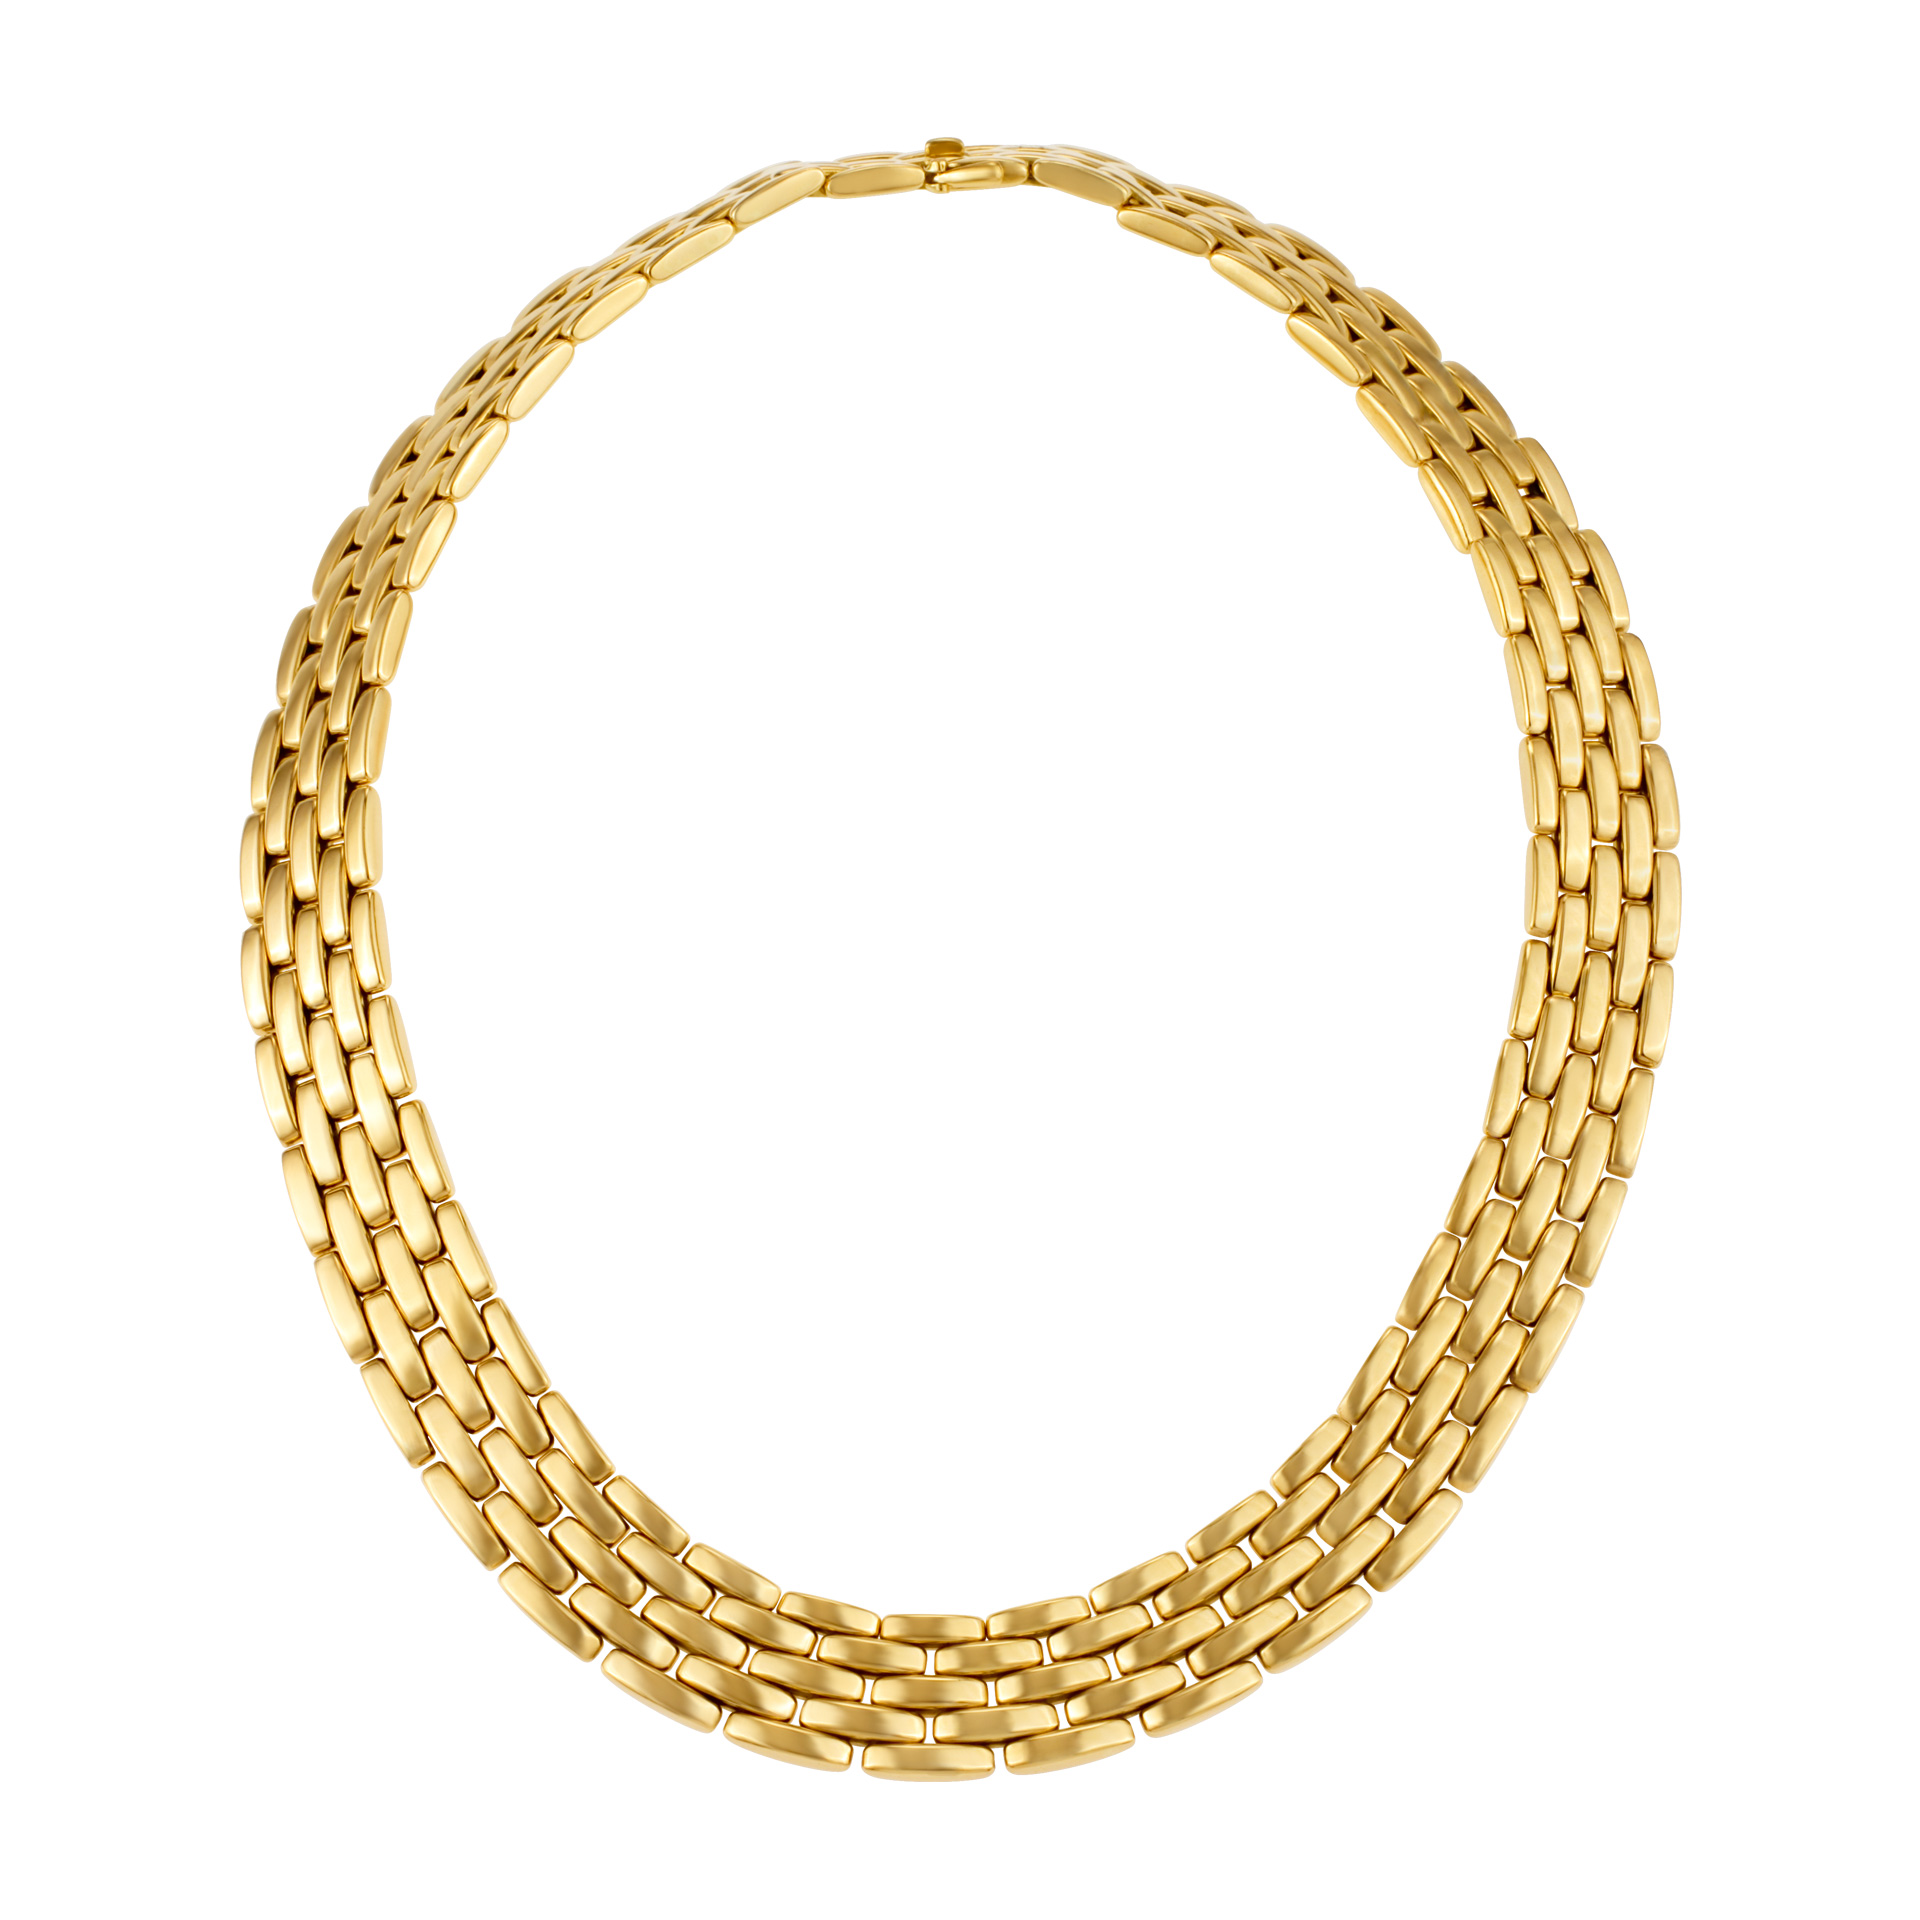 Cartier Panthere necklace in 18k